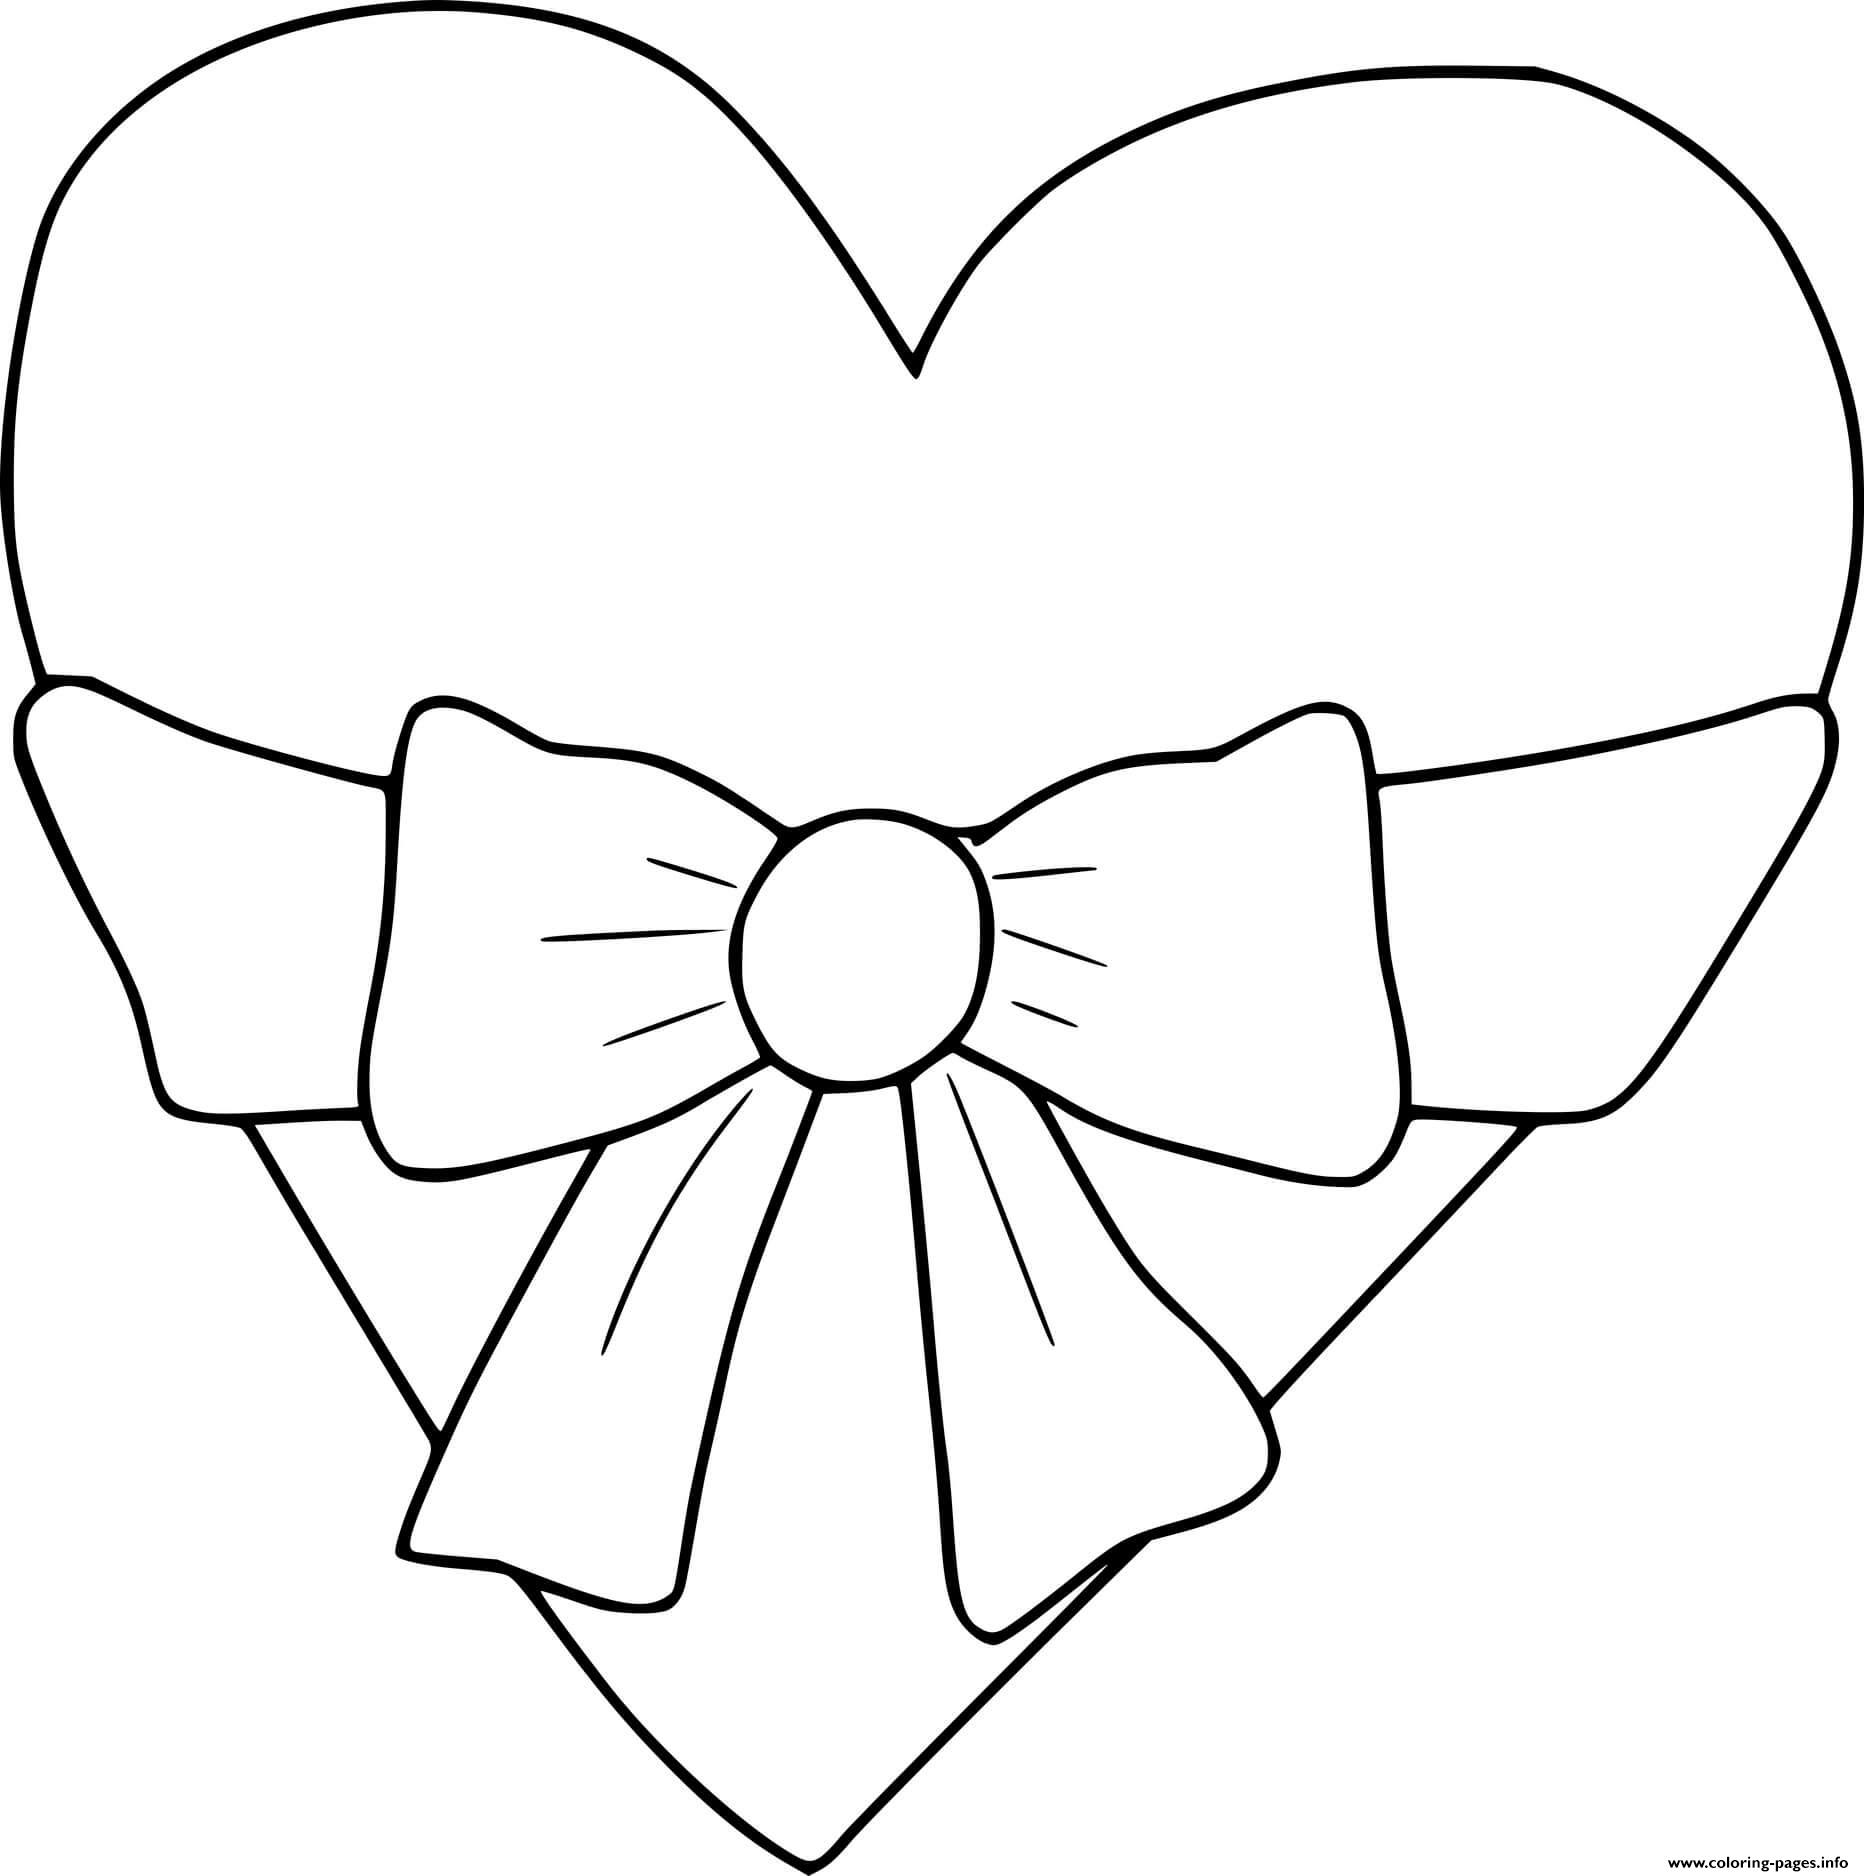 Heart And Bowknot coloring